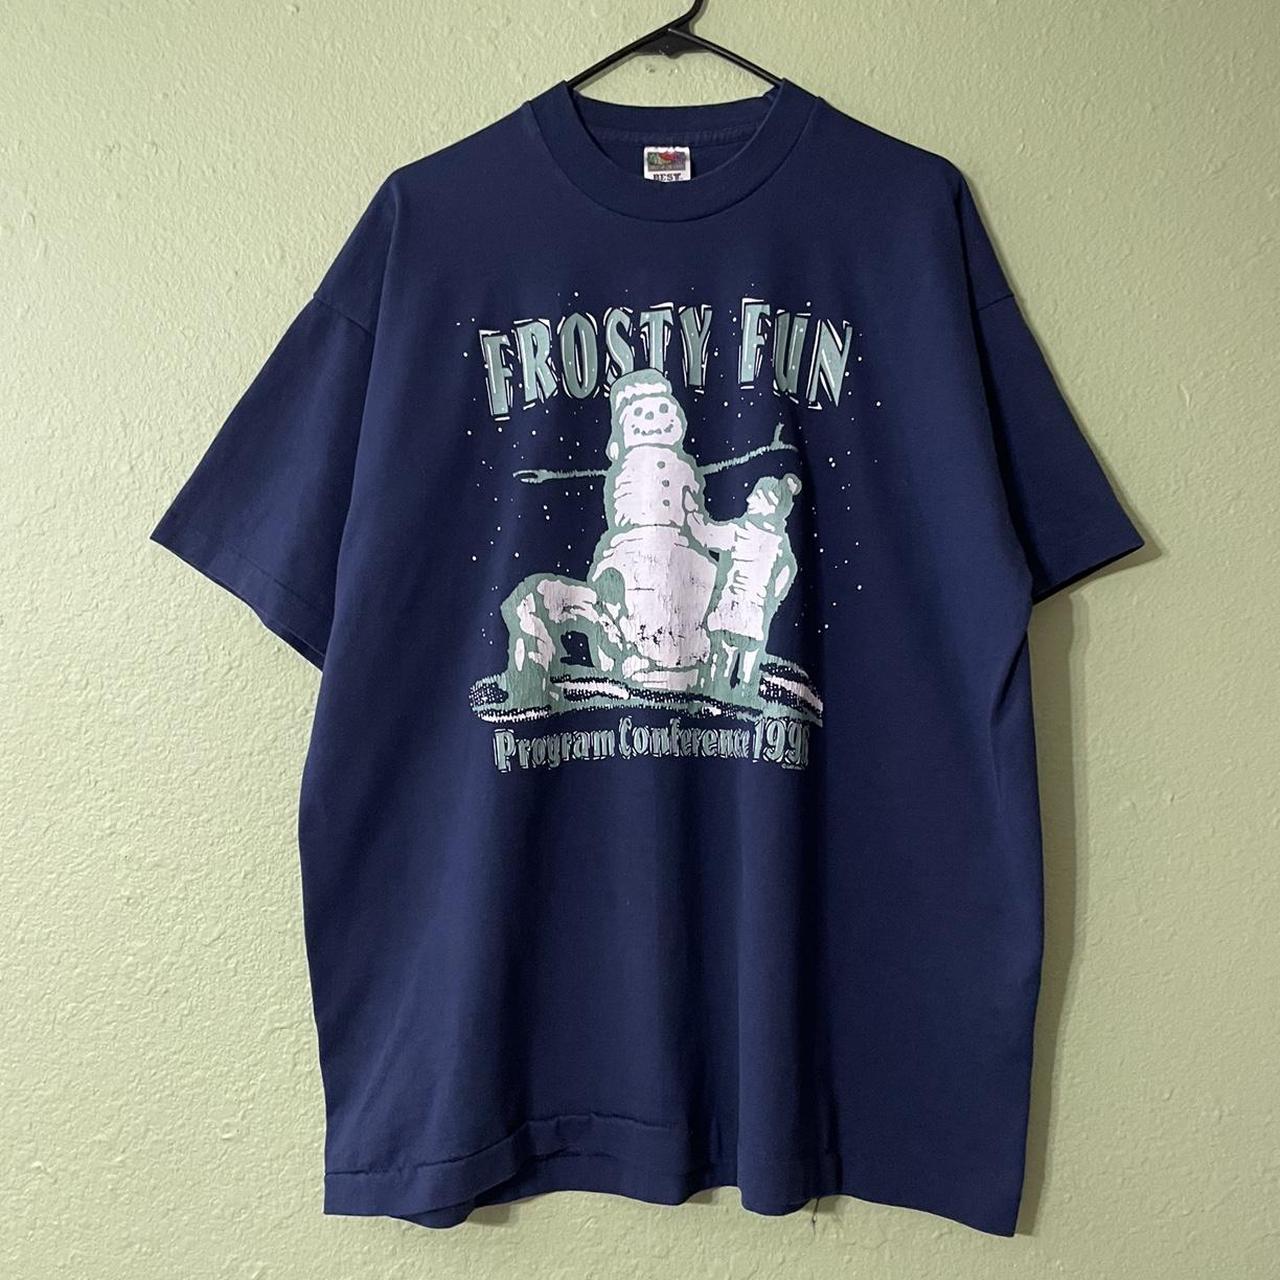 Fit for Me by Fruit of the Loom Men's Navy and Green T-shirt